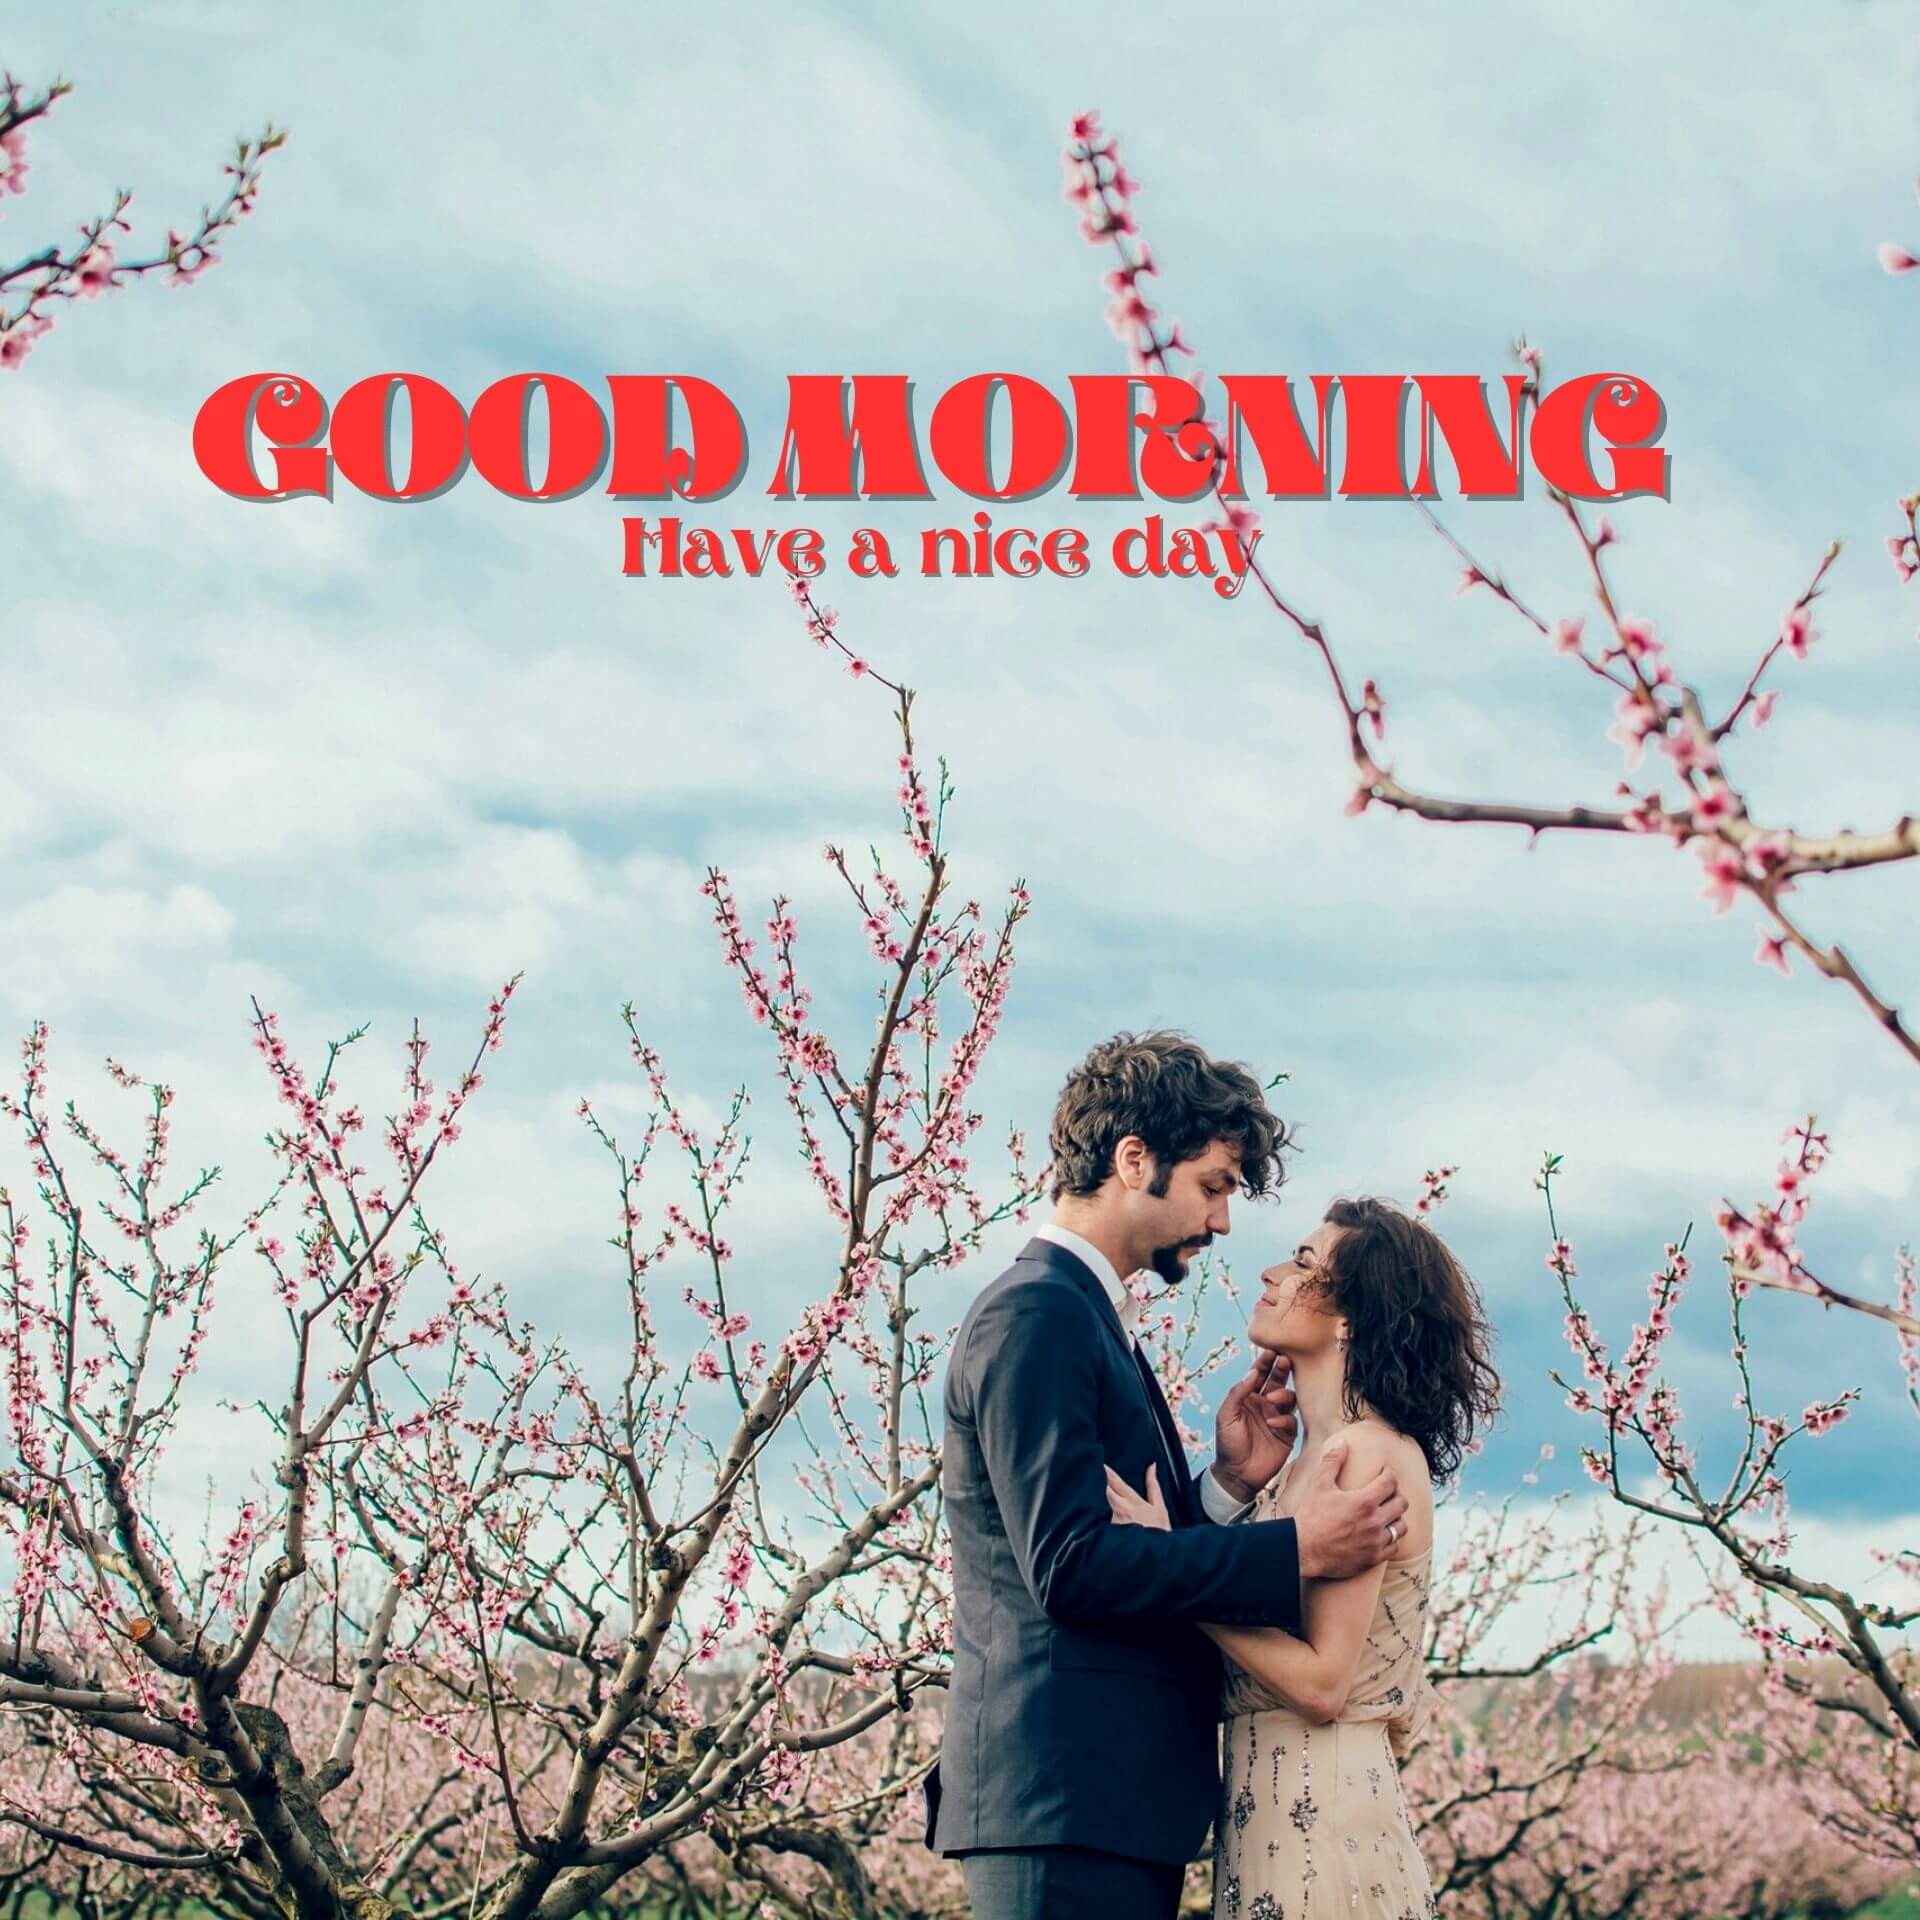 Romantic Good Morning Photo for Love Couple